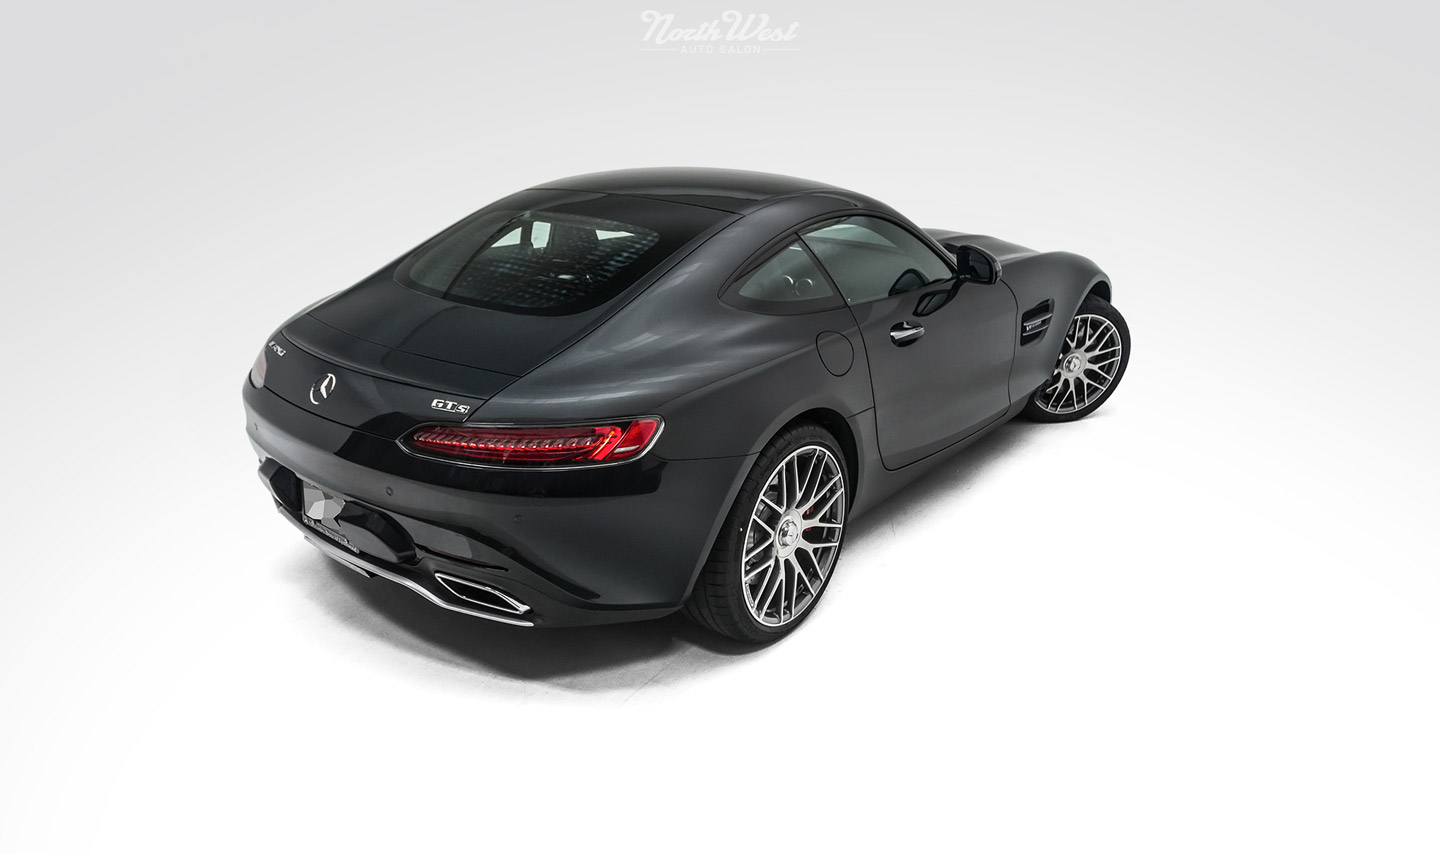 Mercedes-AMG-GT-S-XPEL-Ultimate-paint-protection-studio-4-s